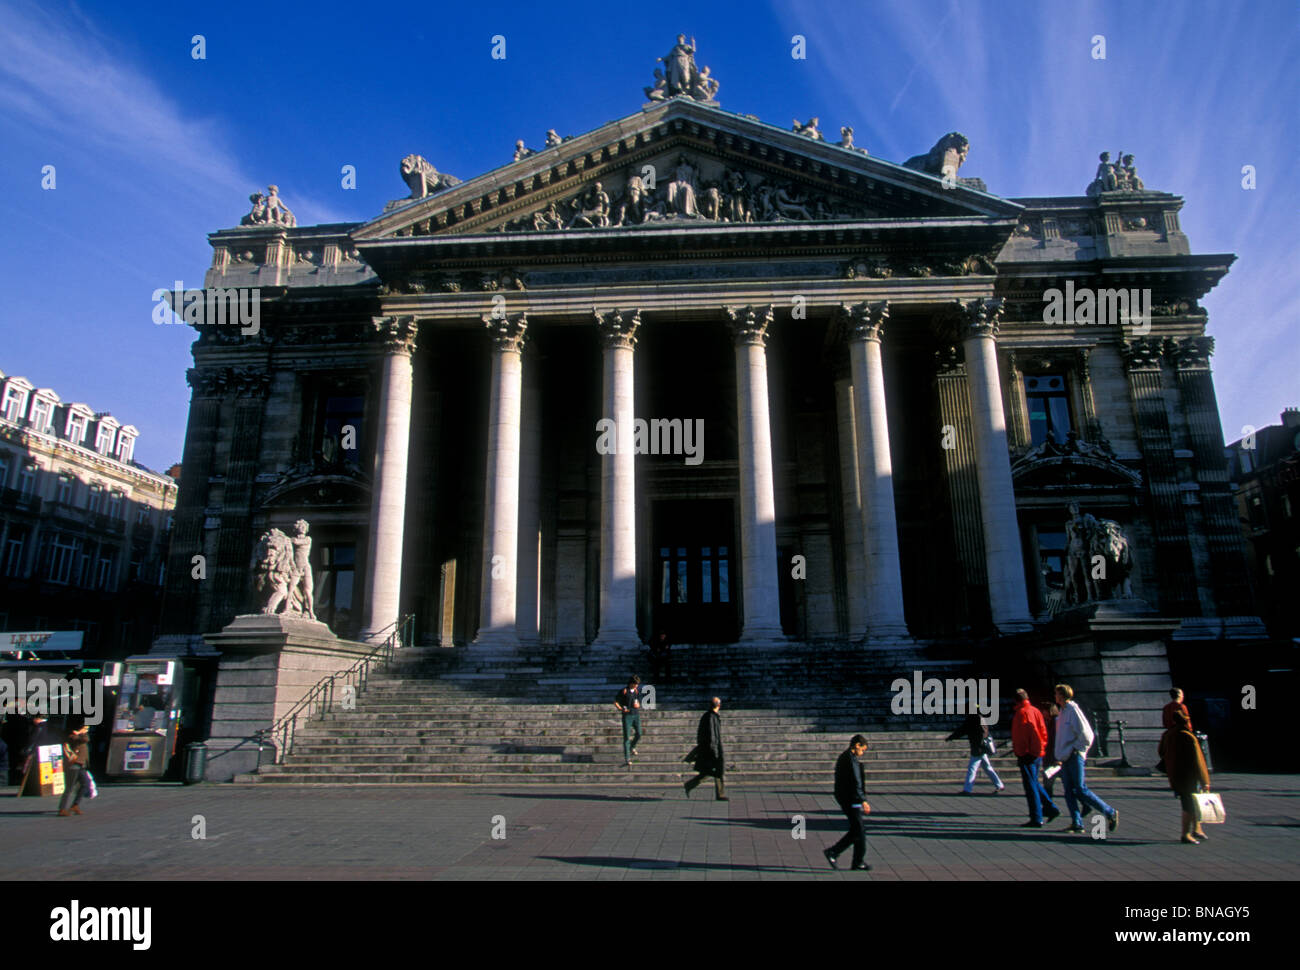 Euronext Brussels, Stock Exchange, Bourse, Anspach Boulevard, city of Brussels, Brussels Capital Region, Belgium, Europe Stock Photo